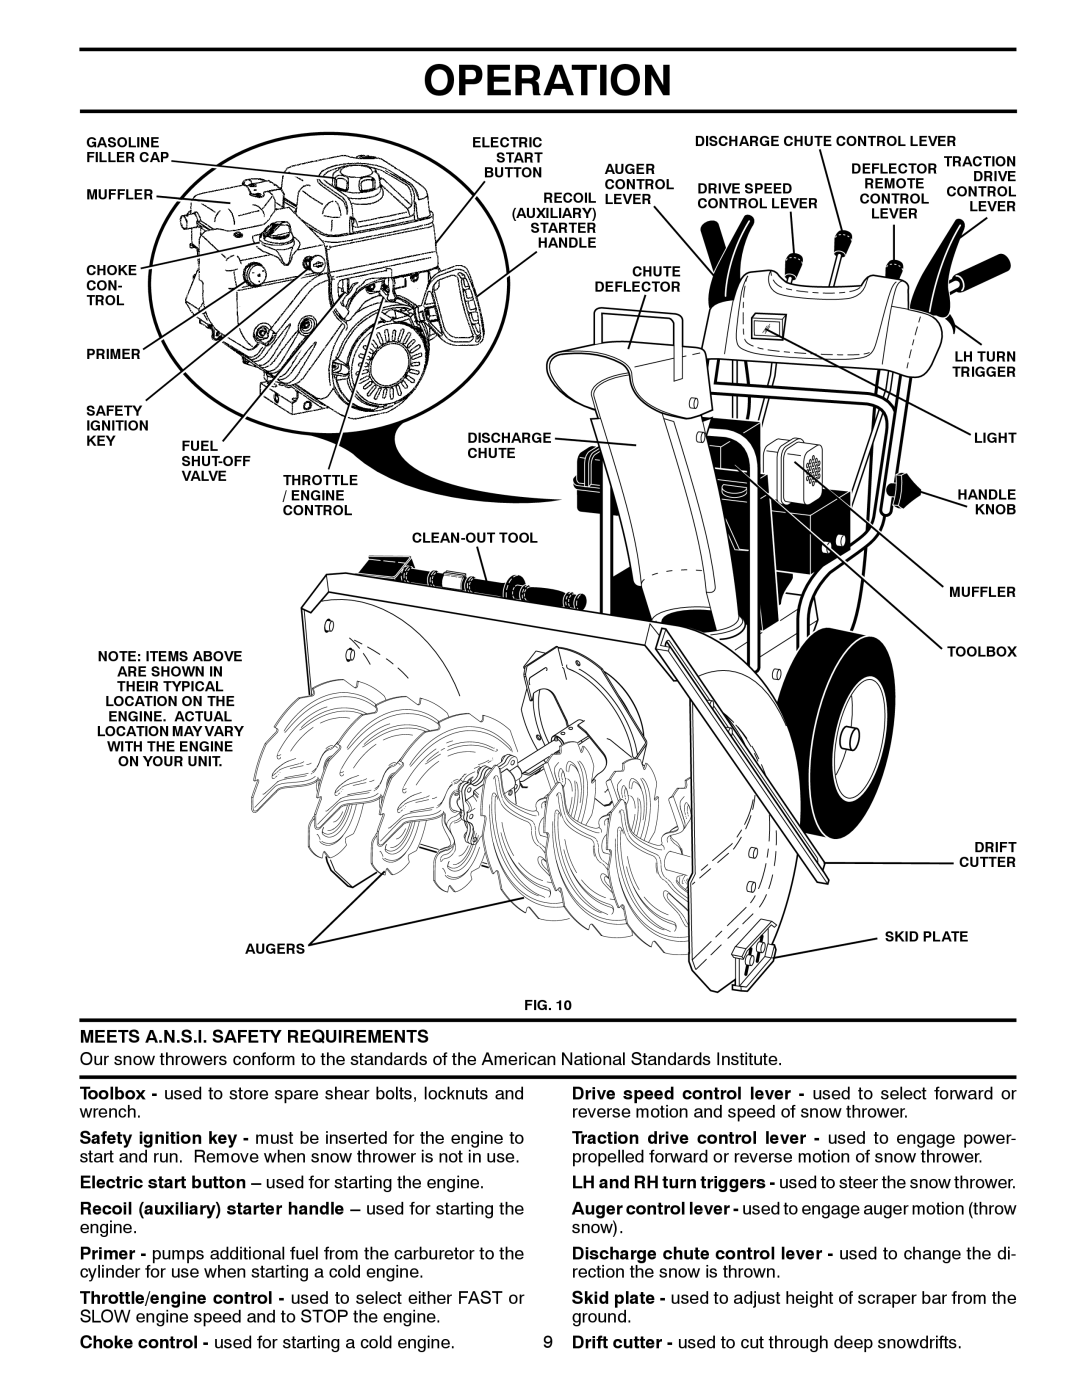 Husqvarna 1130SB-LSB owner manual Operation, Meets A.N.S.I. Safety Requirements 